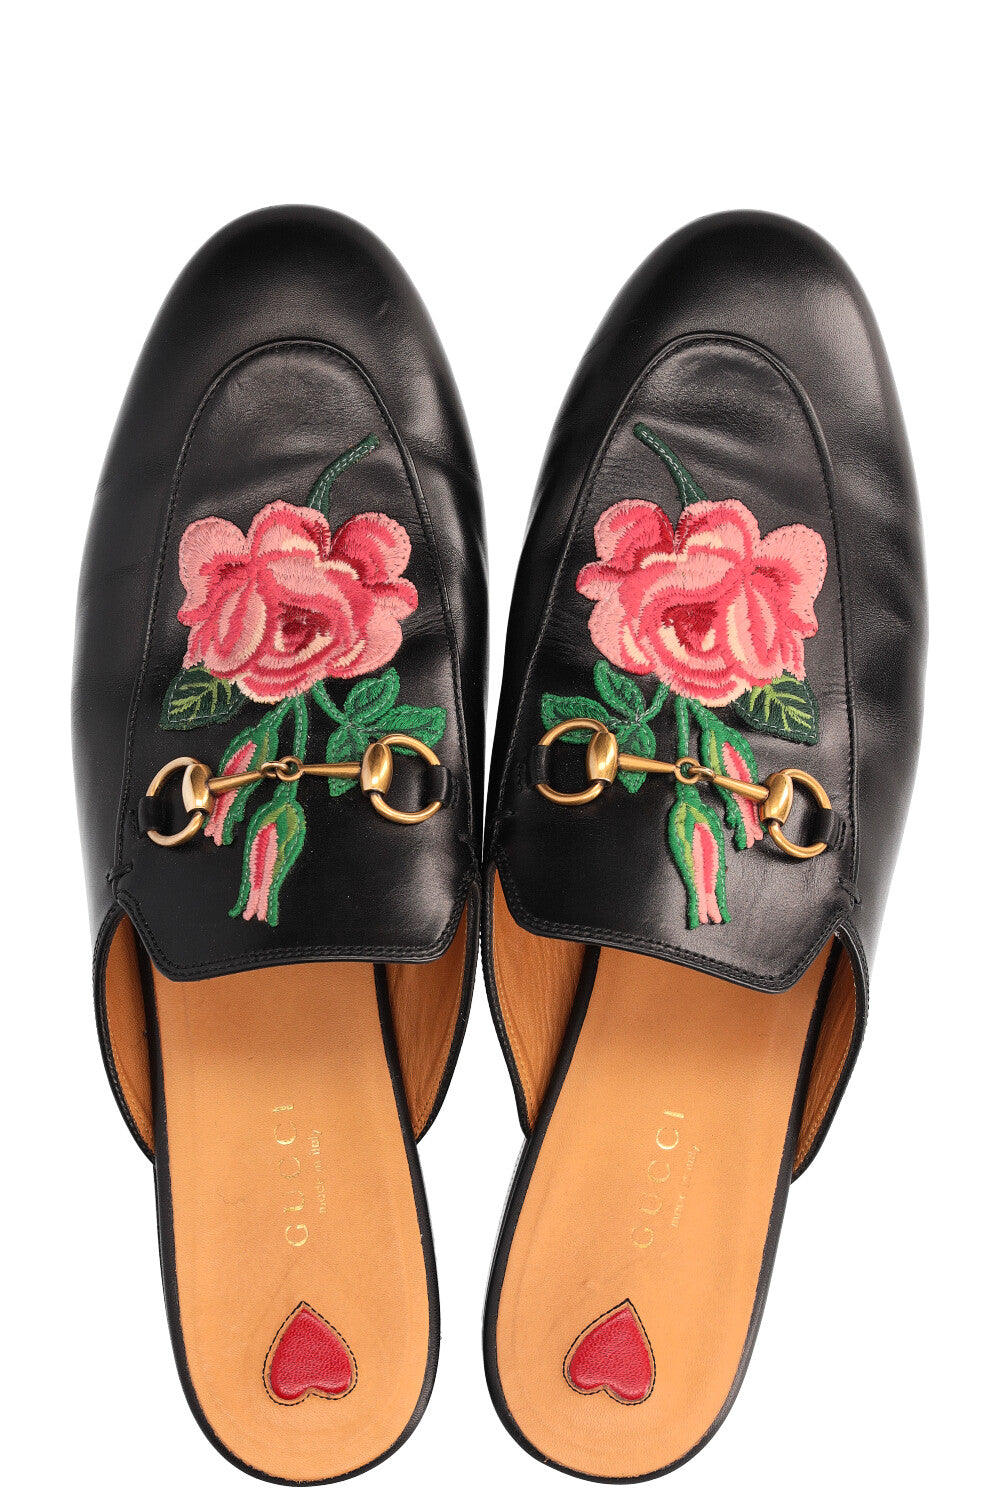 GUCCI Princetown Embroidered Roses Black